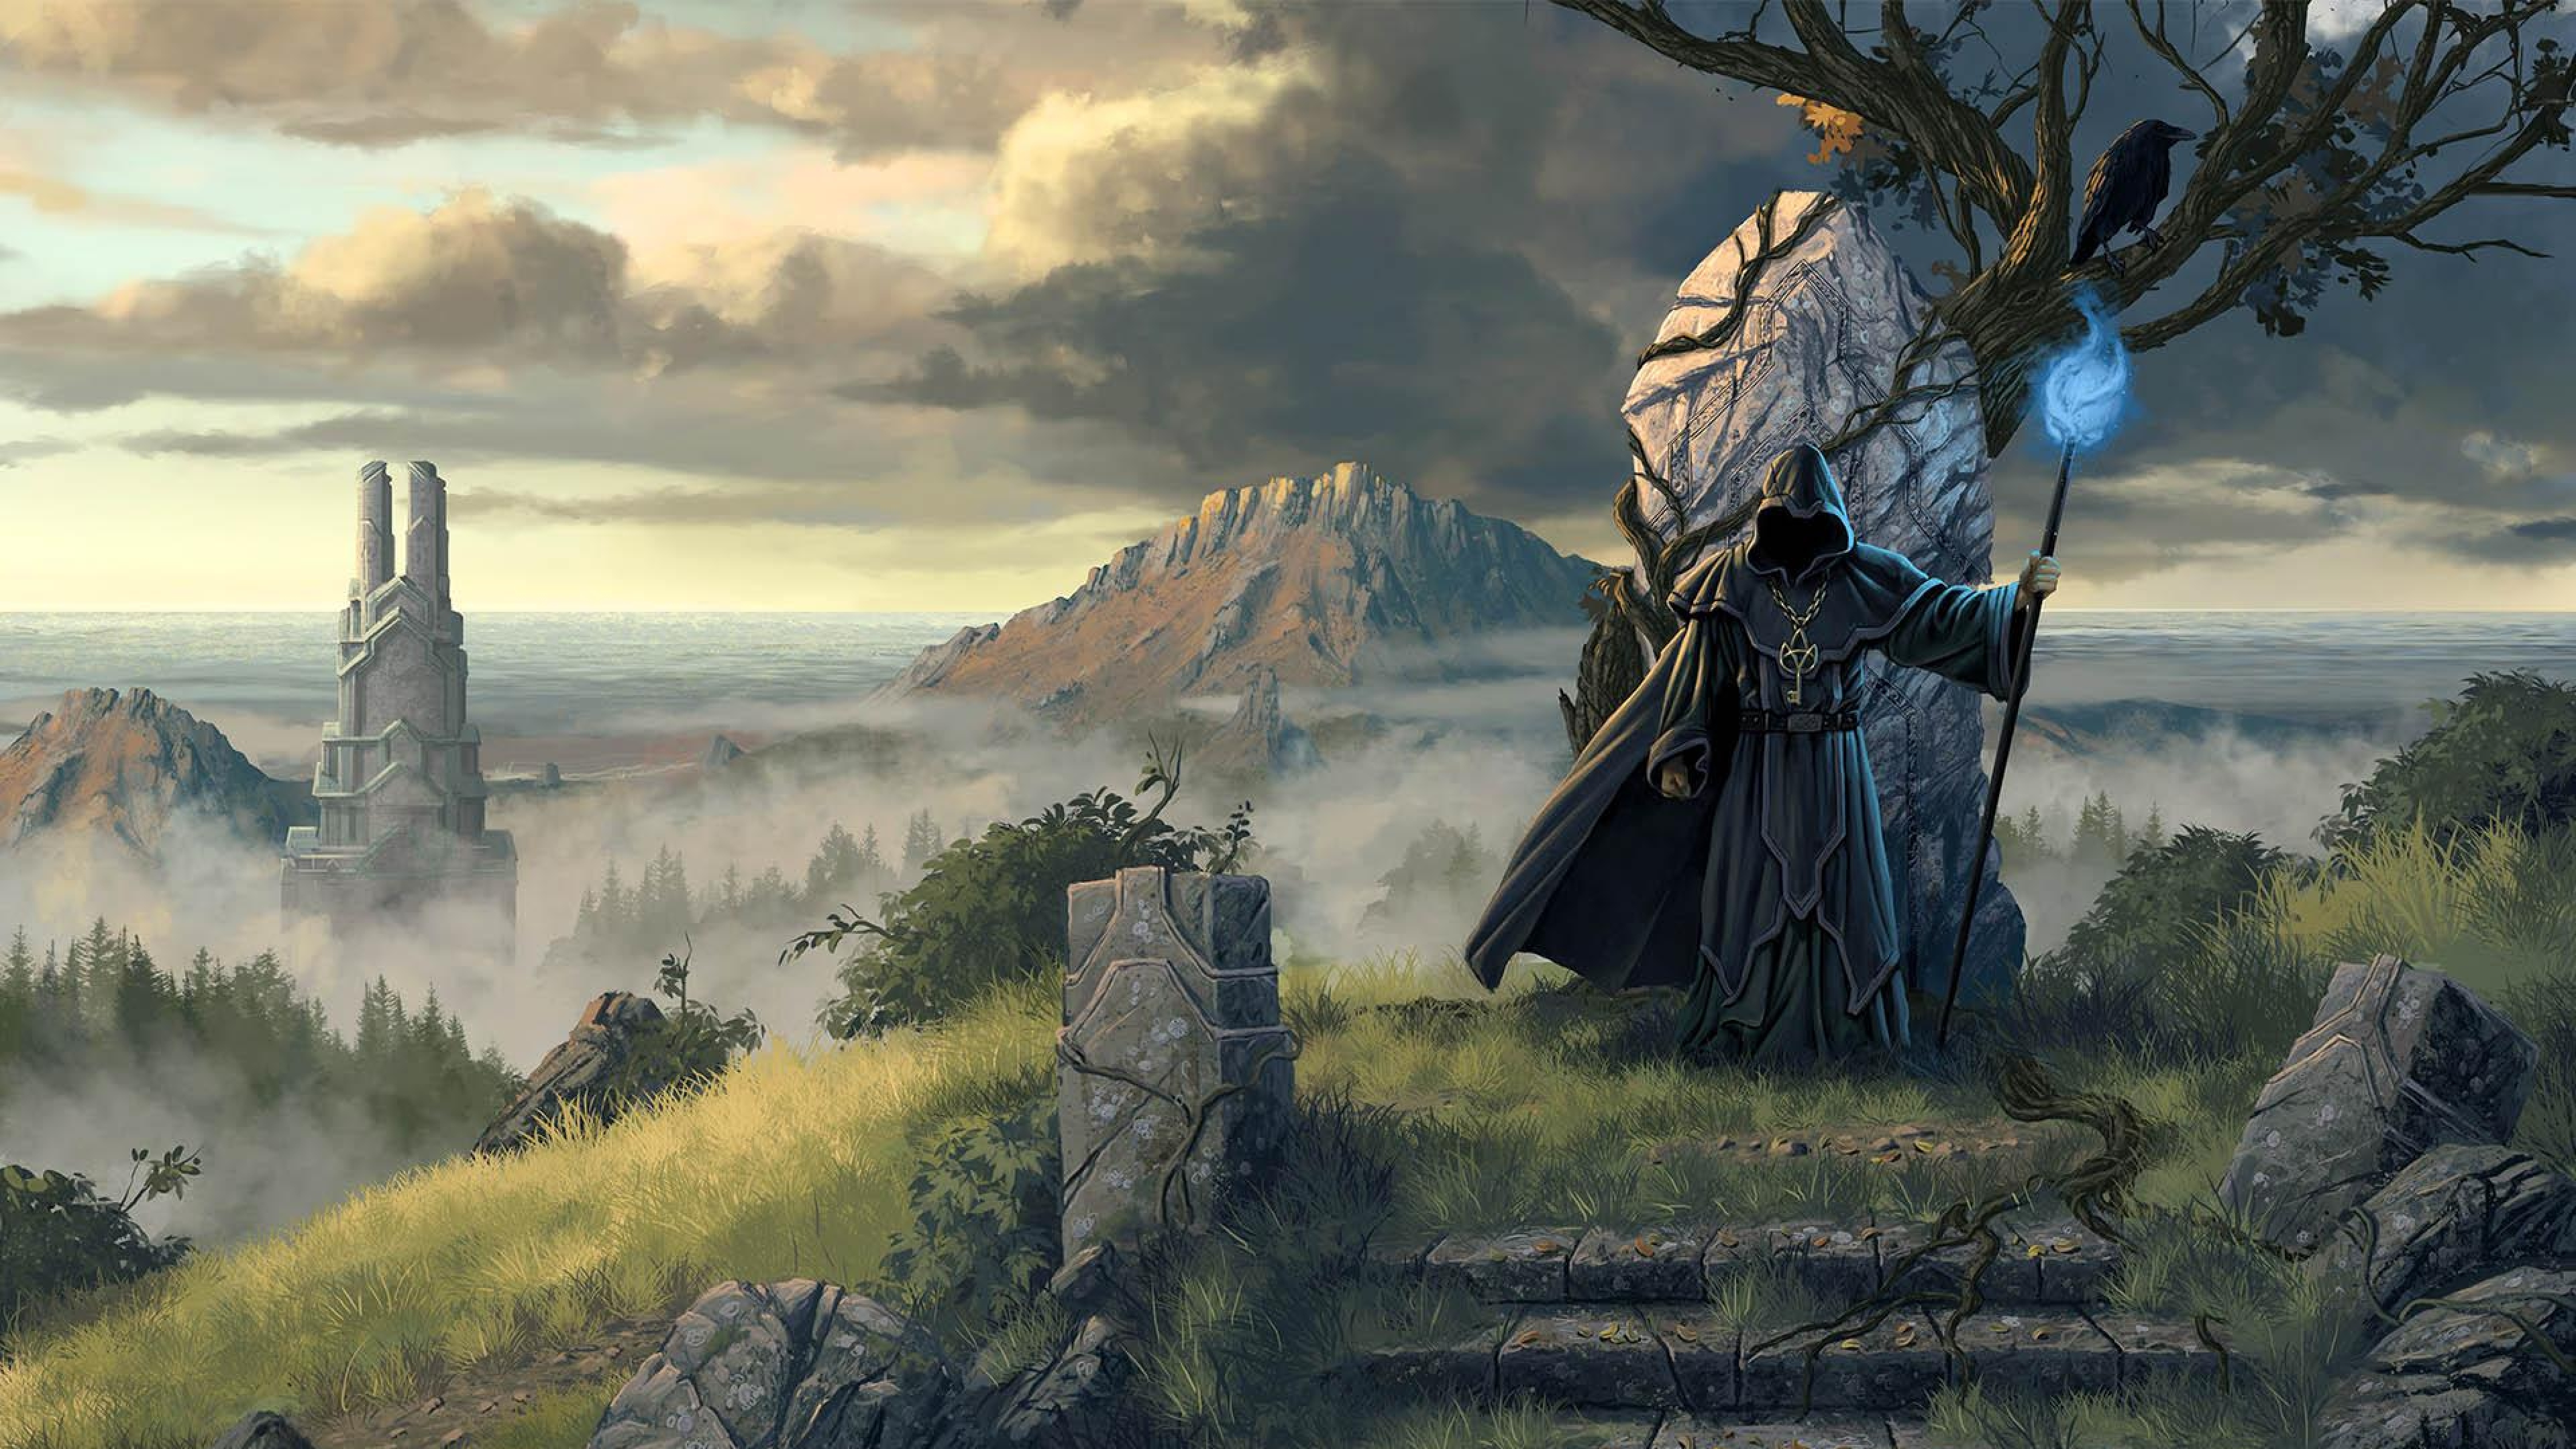 Wizard Of Legend Backgrounds, Compatible - PC, Mobile, Gadgets| 3840x2160 px